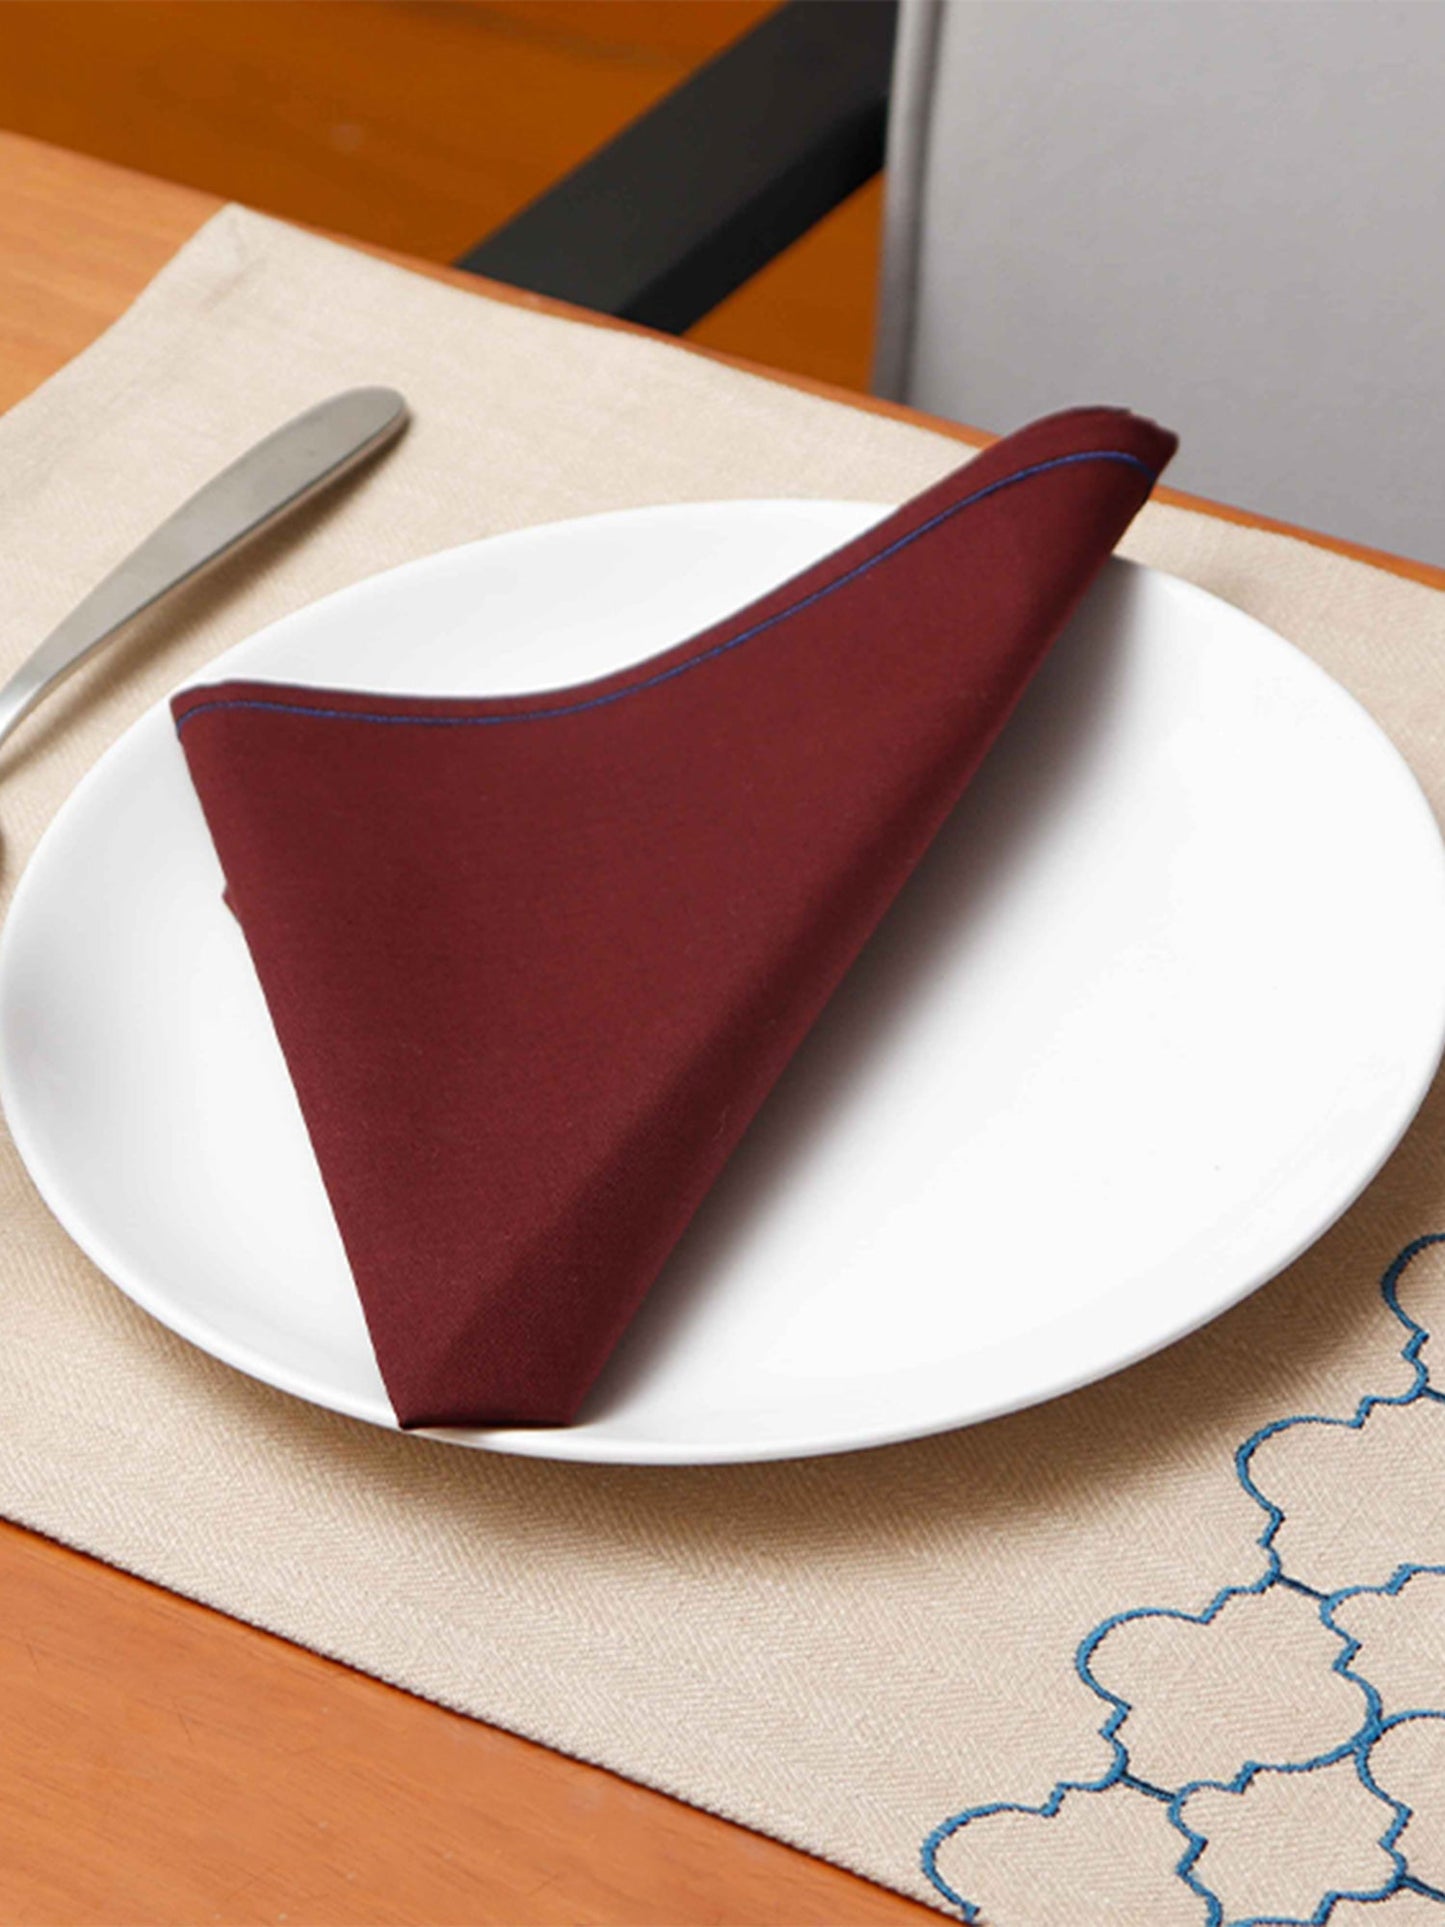 Table Mats and Napkins  Cotton and Polyester Ogee TBeige and Dark Brown - 13" x 19" ; 16" x 16" - Set of 6